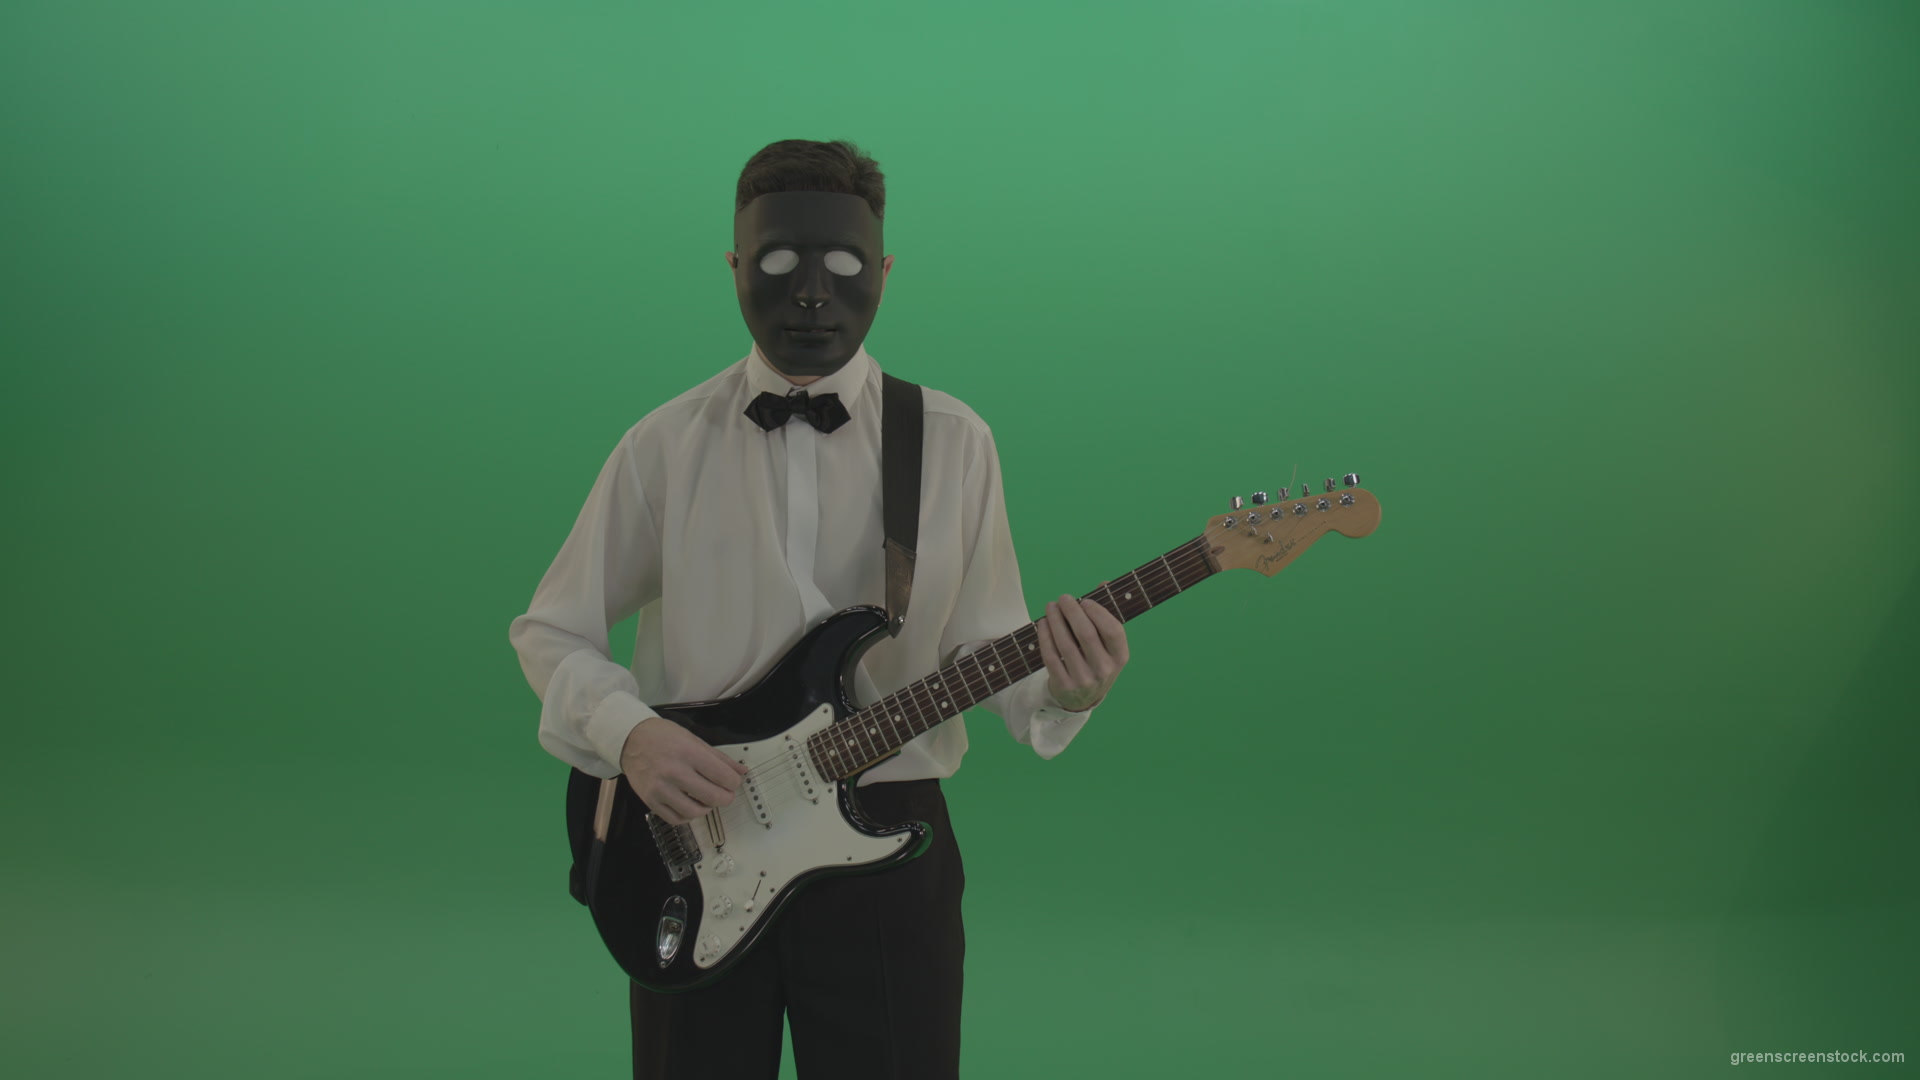 Horror-classic-guitarist-man-in-black-mask-and-white-shirt-play-guitar-on-green-screen_007 Green Screen Stock